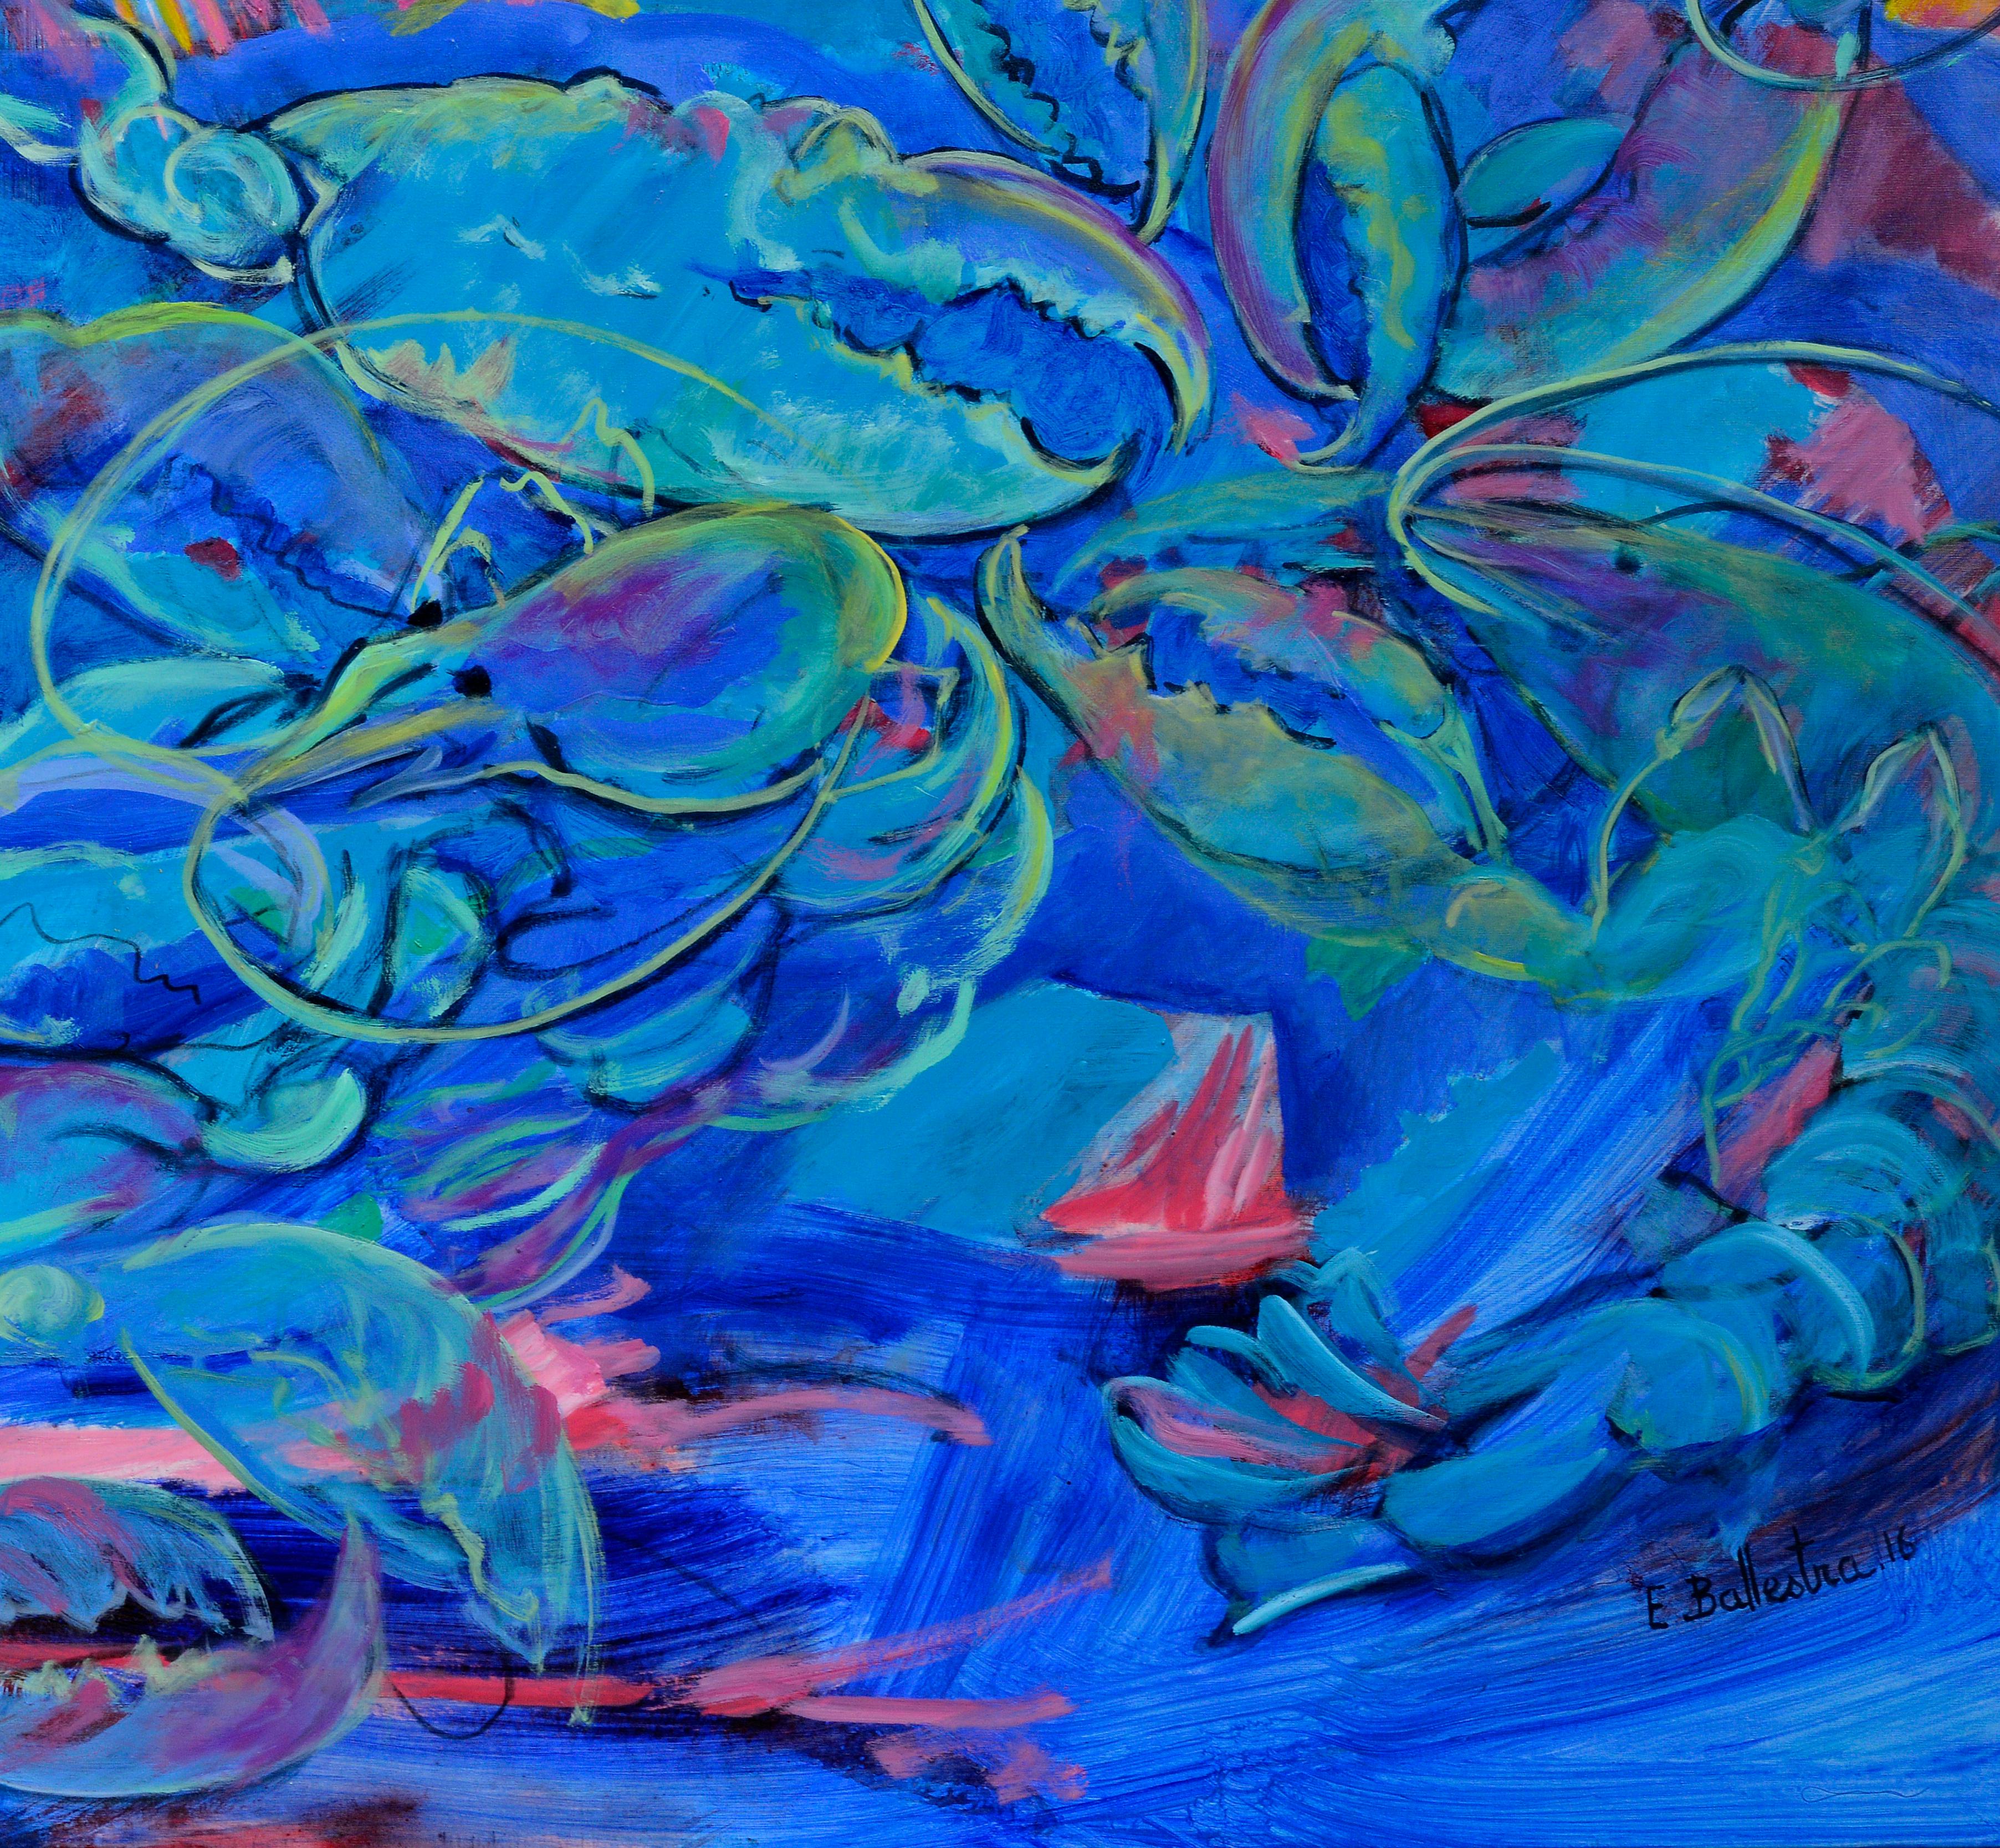 The Lobsters - Blue Figurative Painting by Evelyne Ballestra